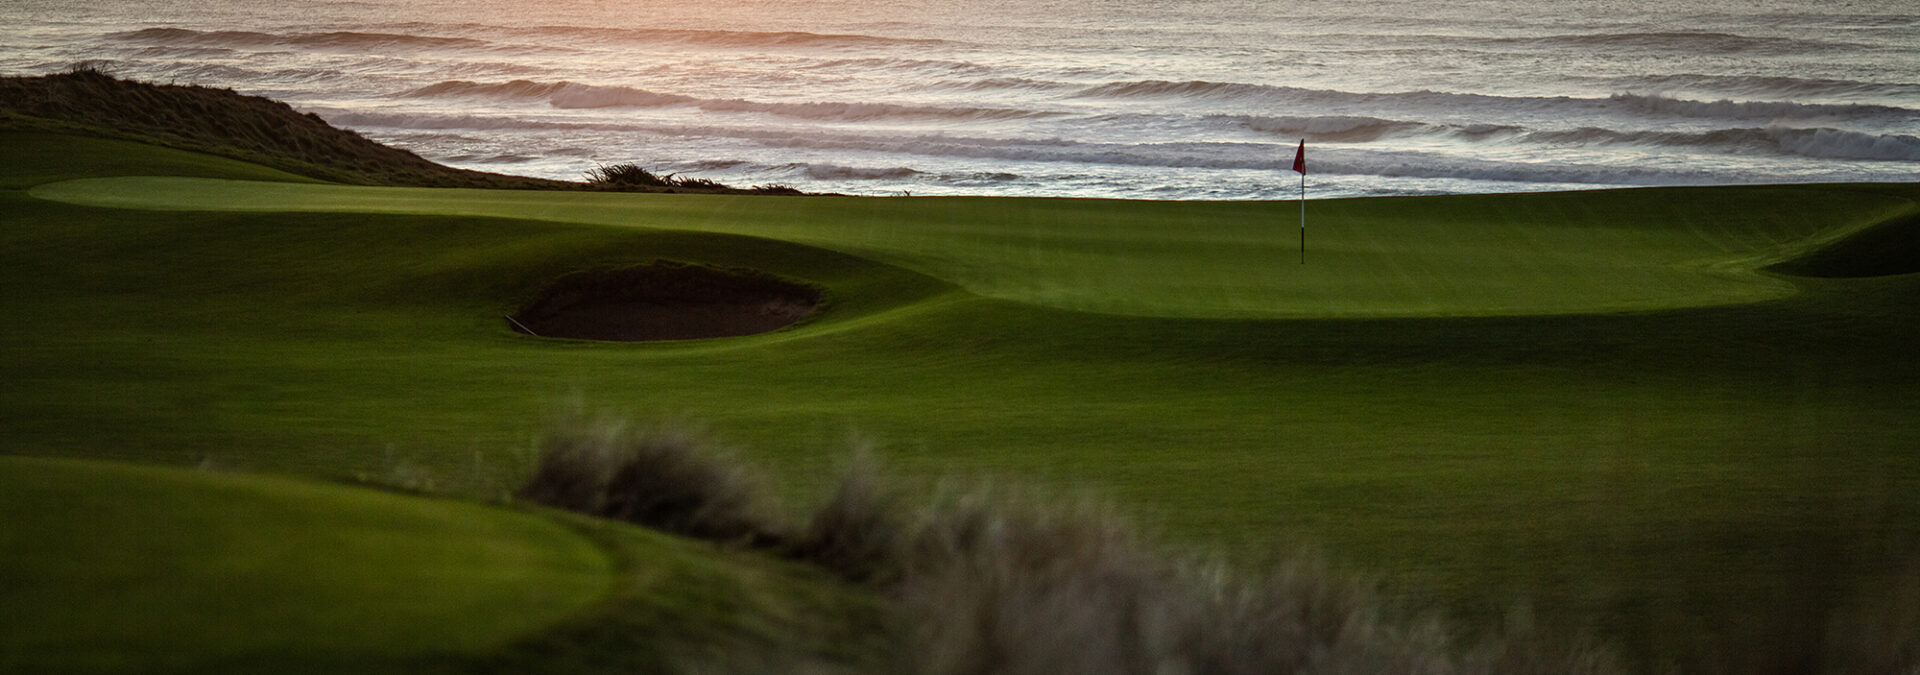 Golf course overlooking the Pacific ocean